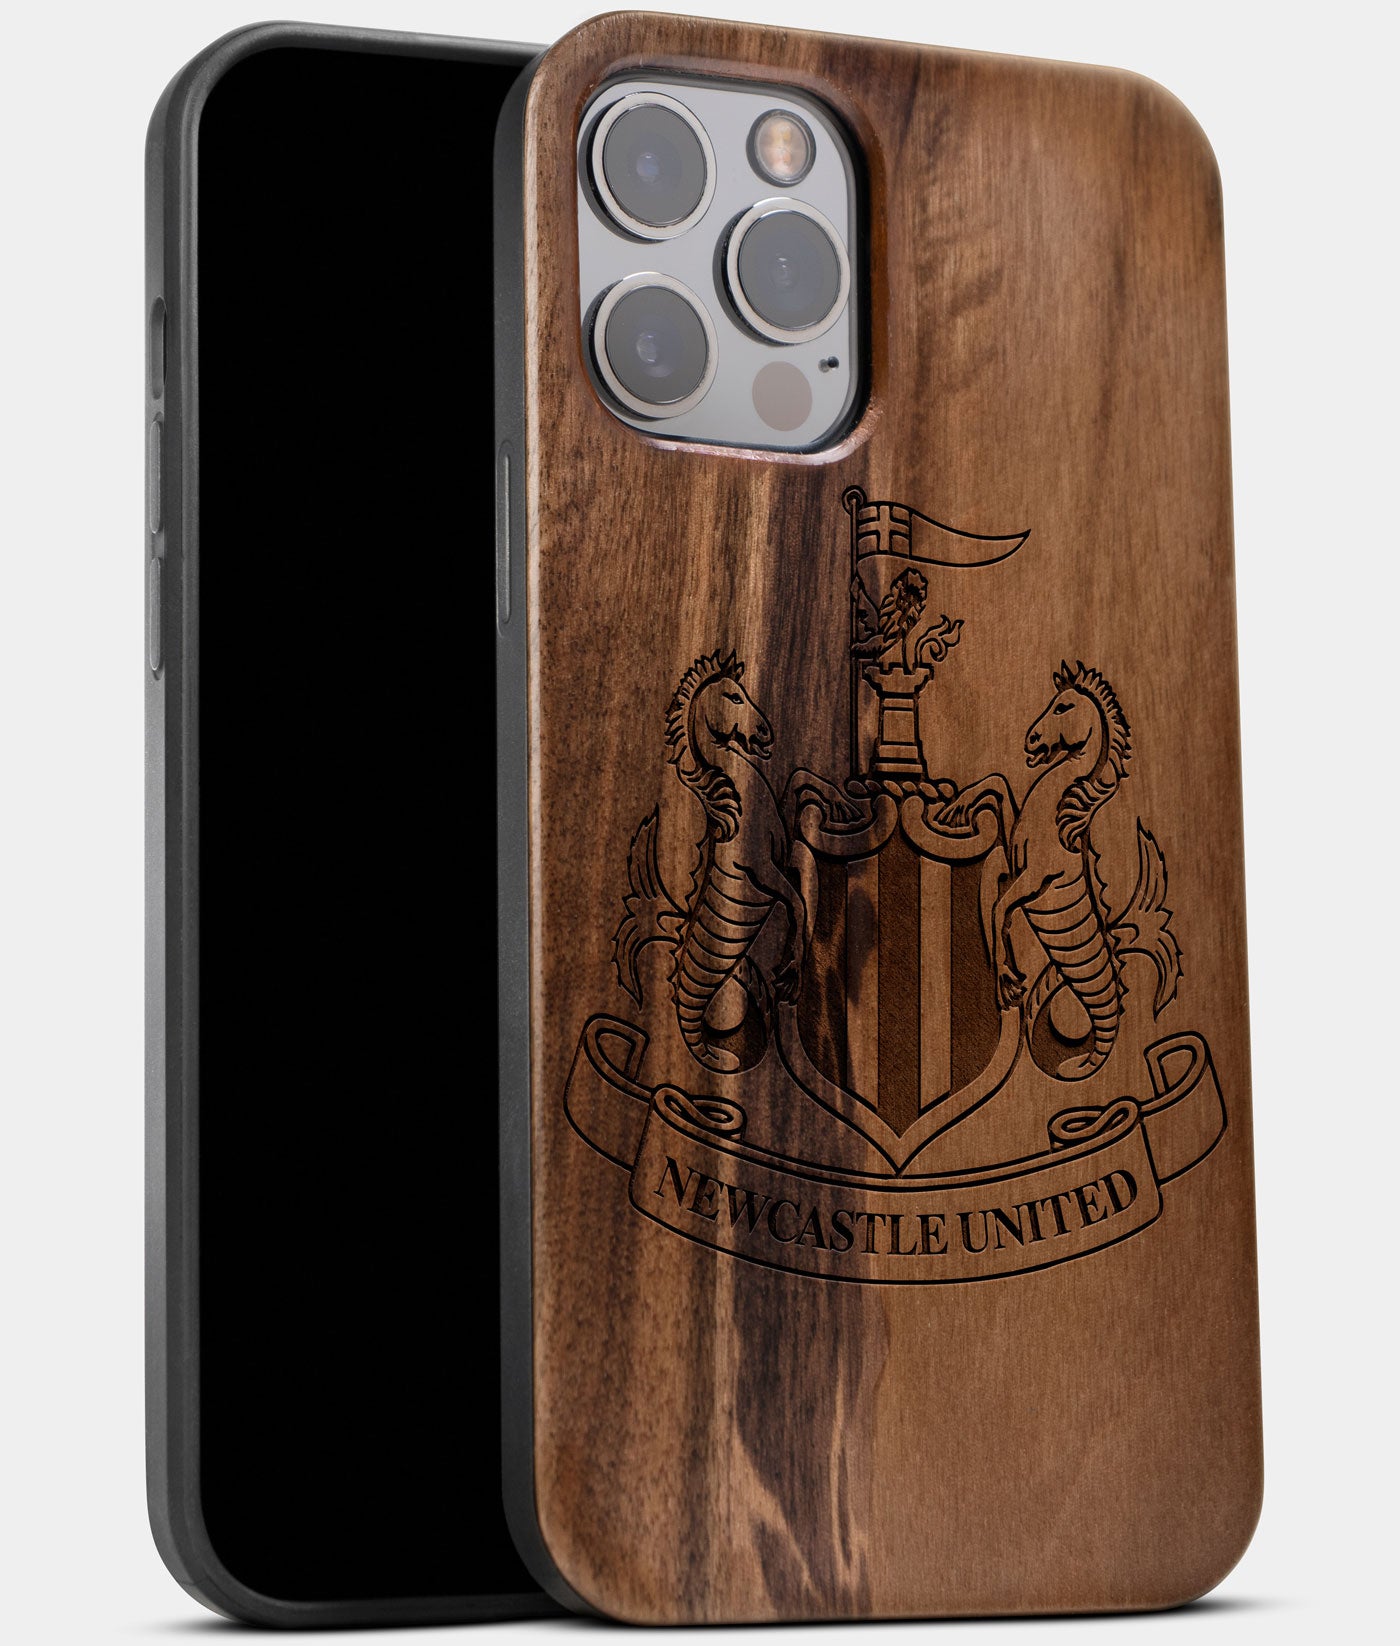 Best Wood Newcastle United F.C. iPhone 13 Pro Case | Custom Newcastle United F.C. Gift | Walnut Wood Cover - Engraved In Nature